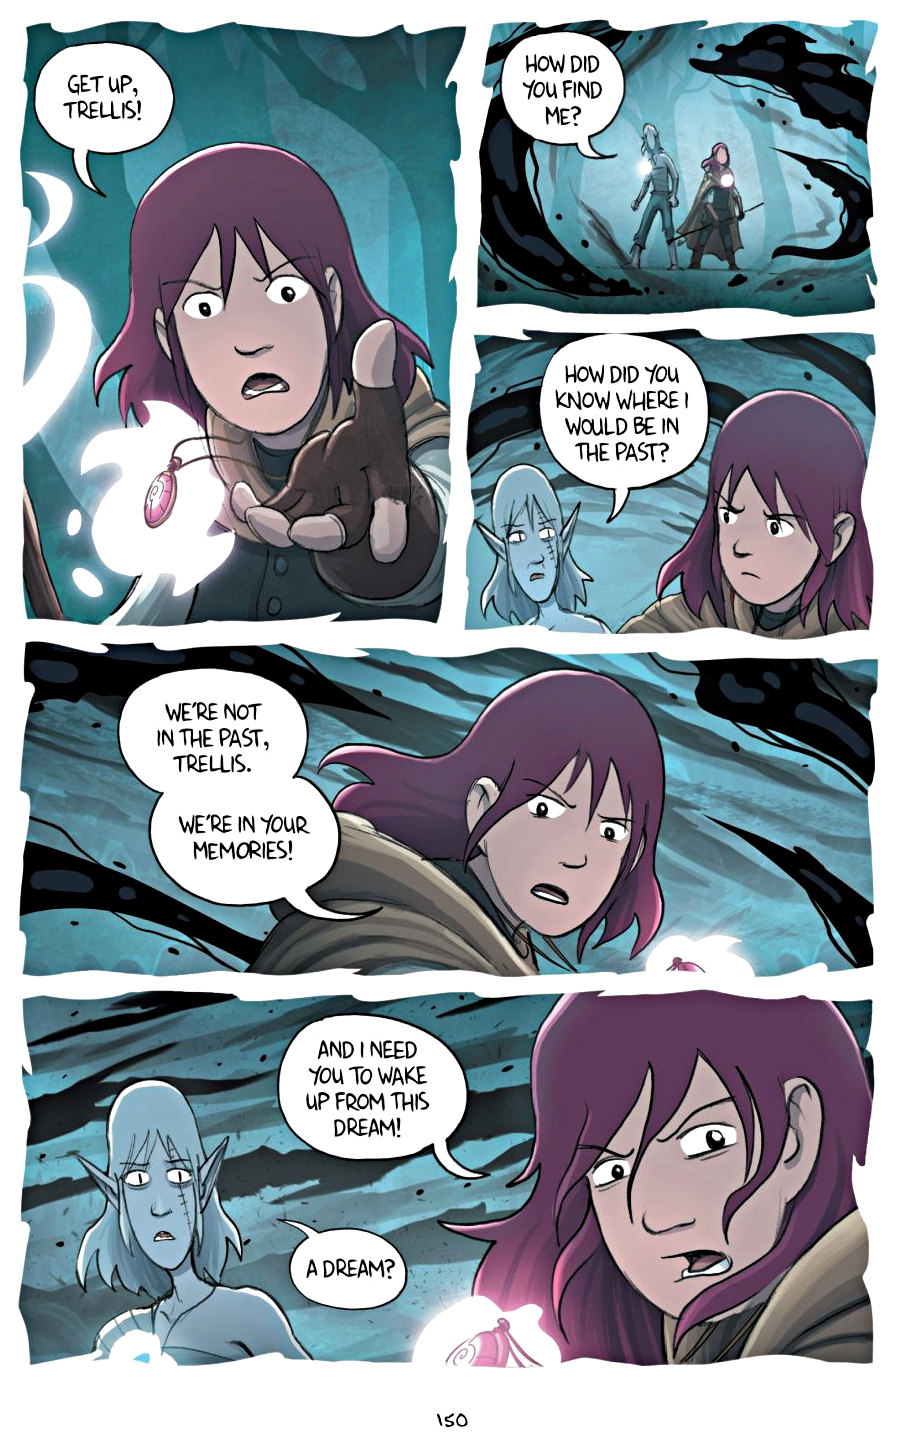 page 150 of amulet 5 prince of the elves graphic novel